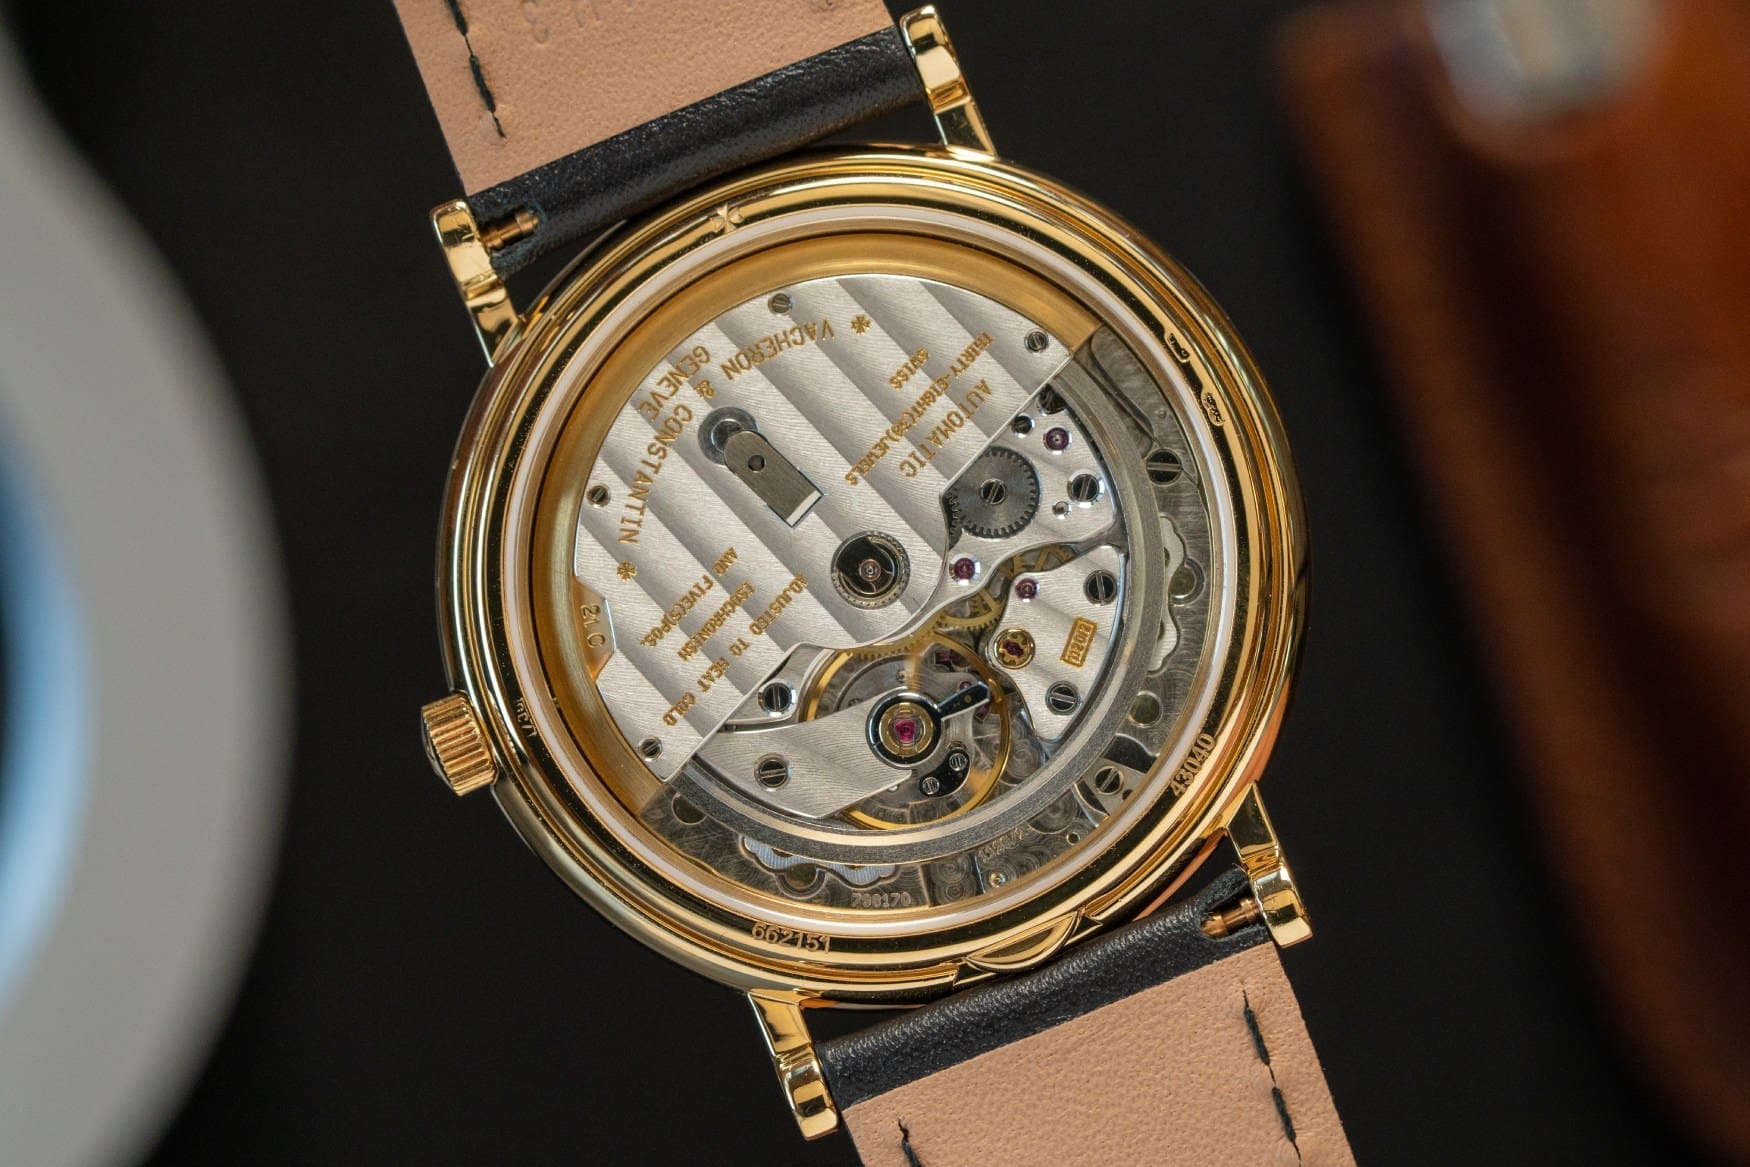 vacheron constantin les collectionneurs jumping hours mysterious minutes yellow gold ref 43040 movement caseback